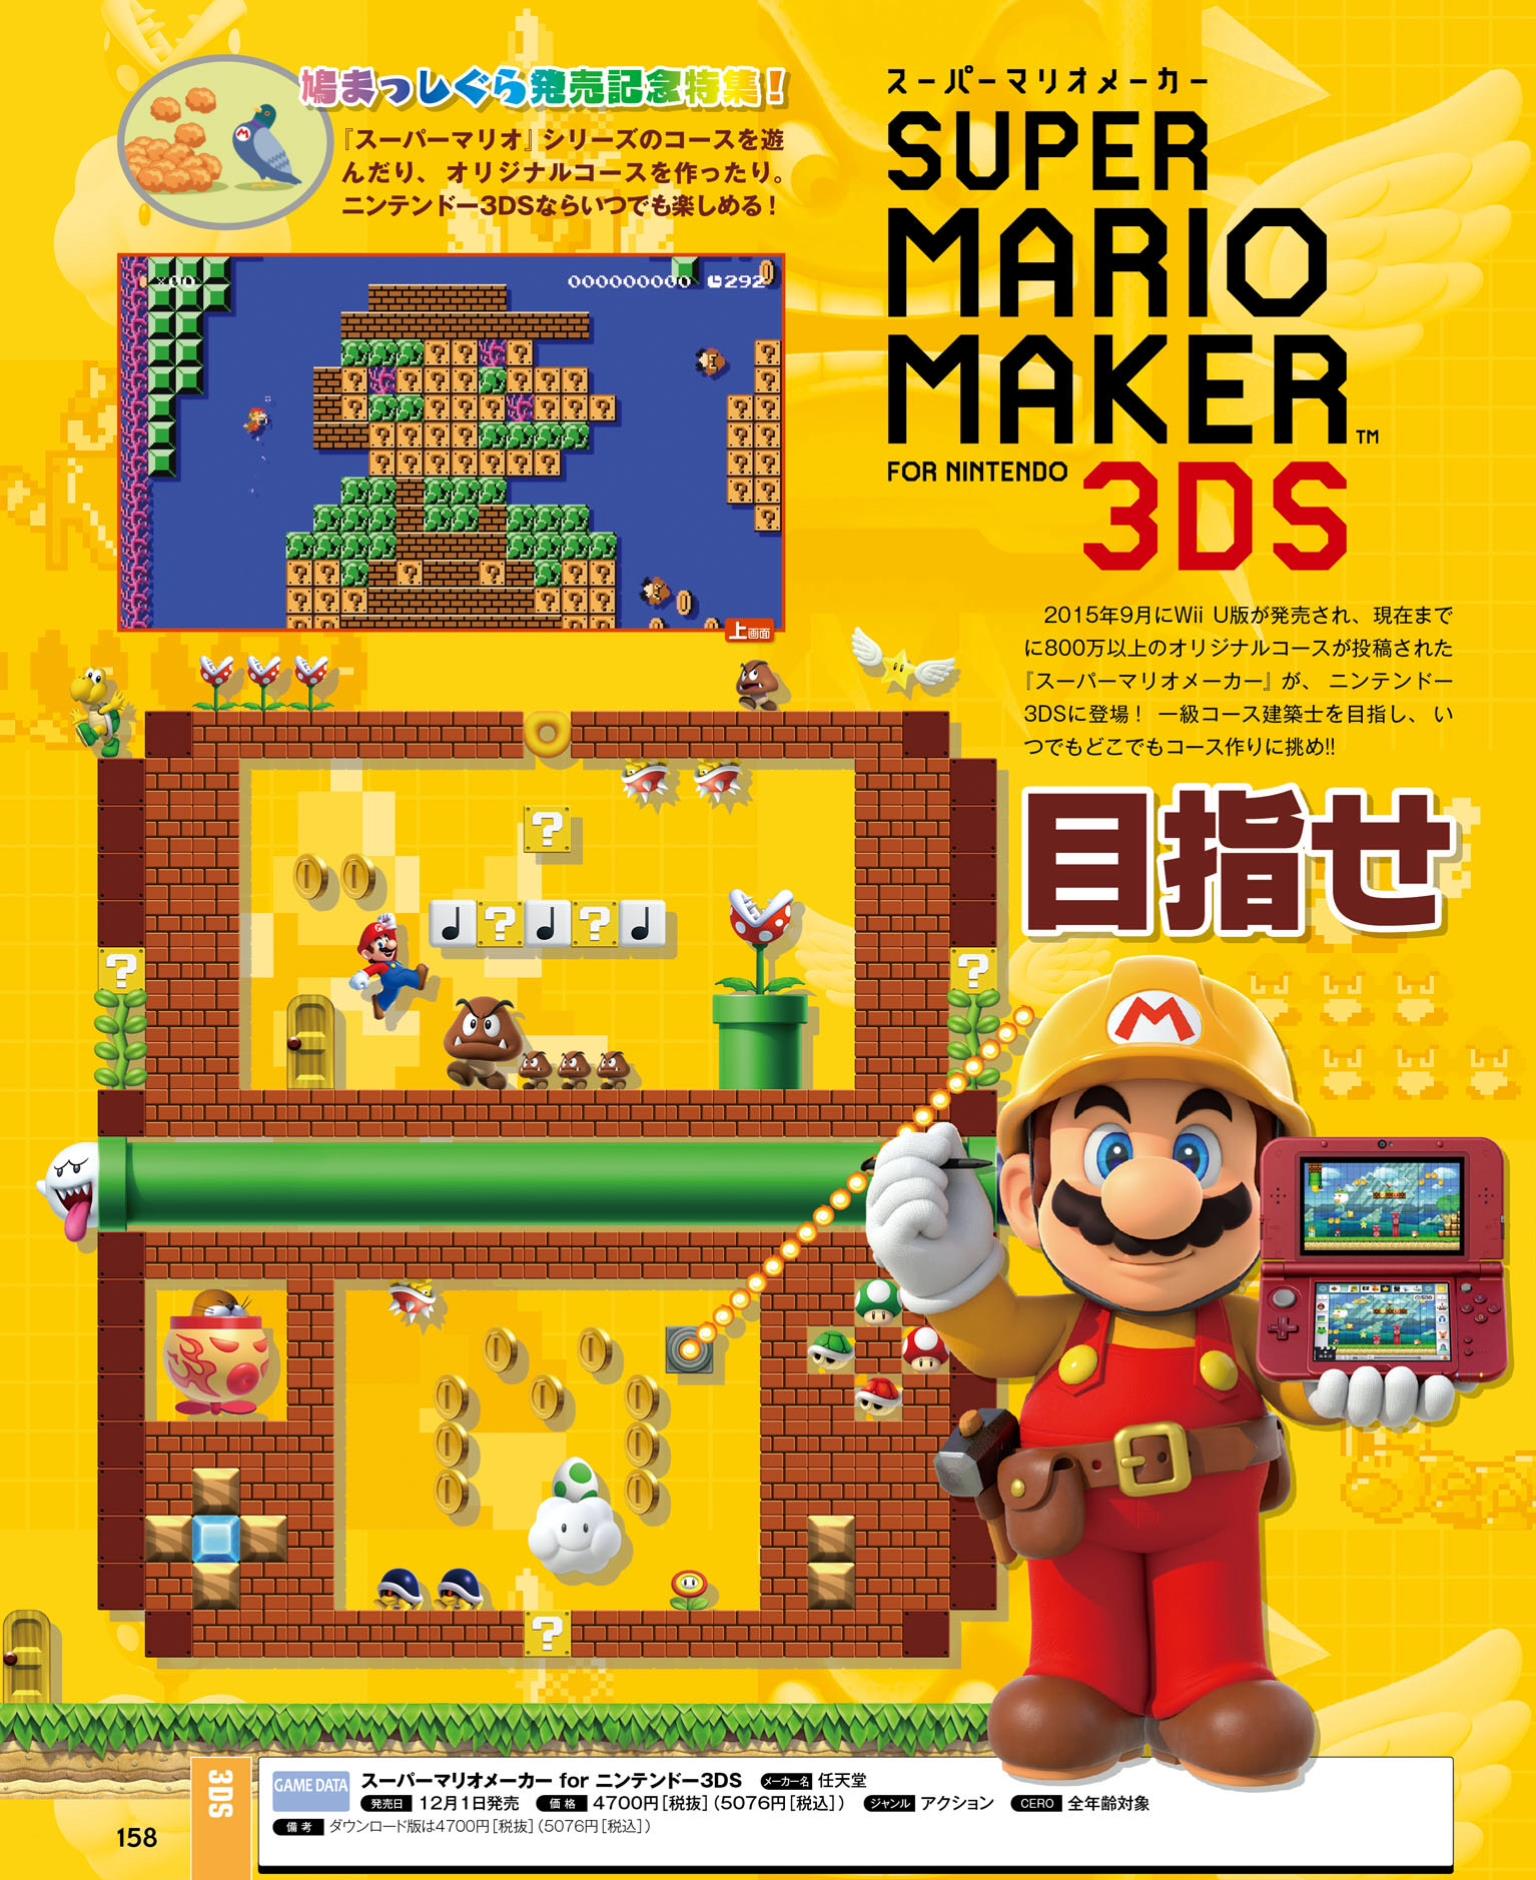 Scans roundup - Digimon Universe: Appli Monsters, Super Mario Maker for 3DS, more ...1536 x 1880